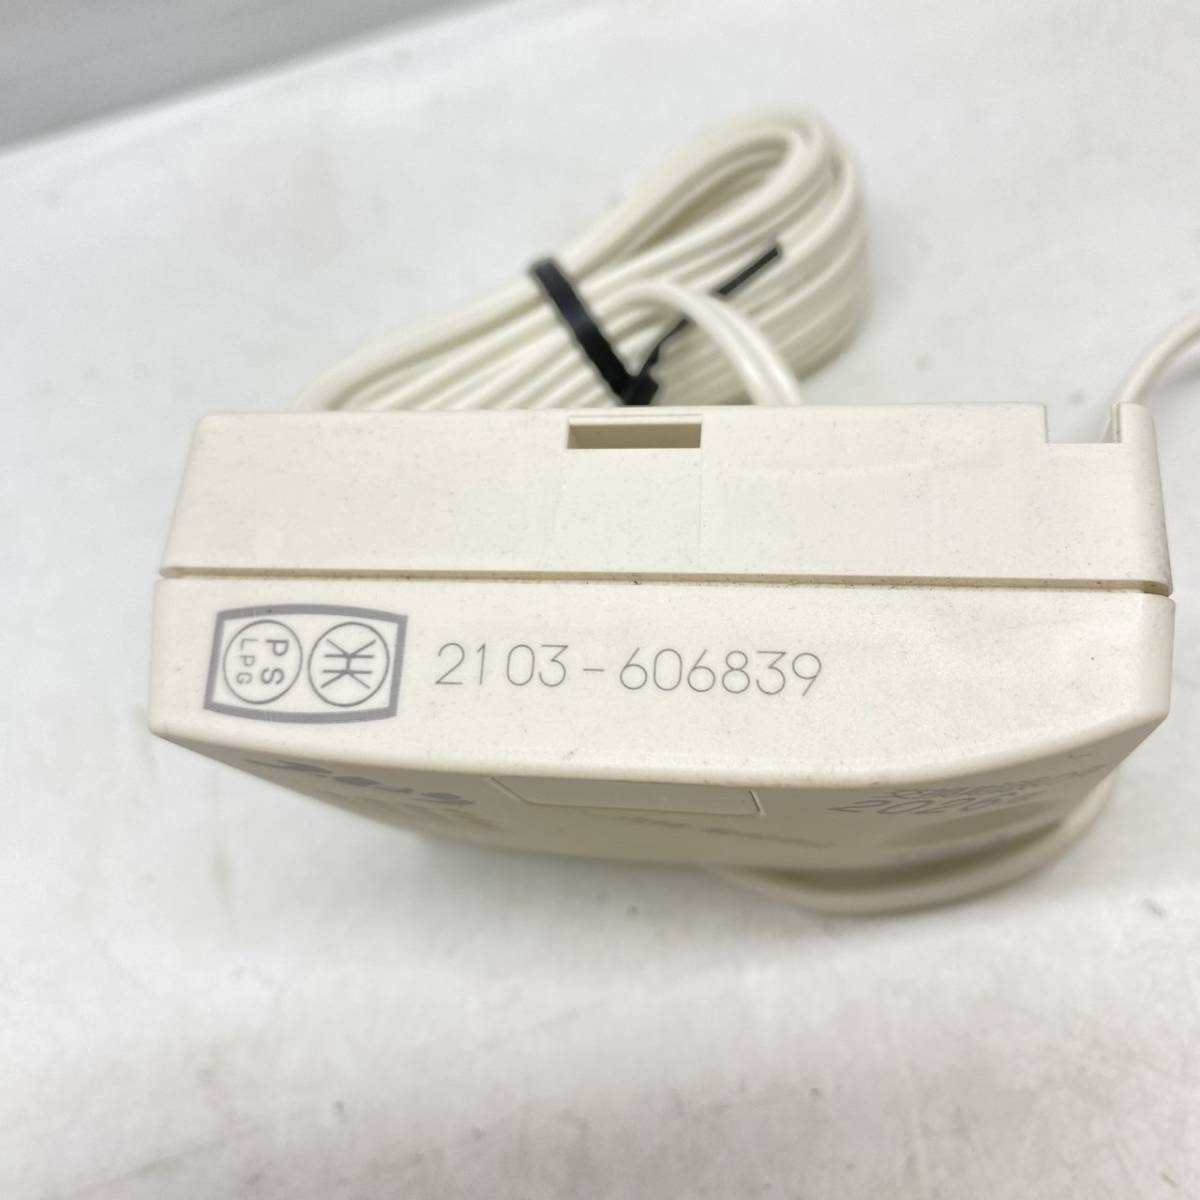  free shipping g23887 gas leak alarm vessel liquefied petroleum gas for CF-625 rock . industry 100V 0.9W. is .50/60Hz common use 2026 year exchange time limit 